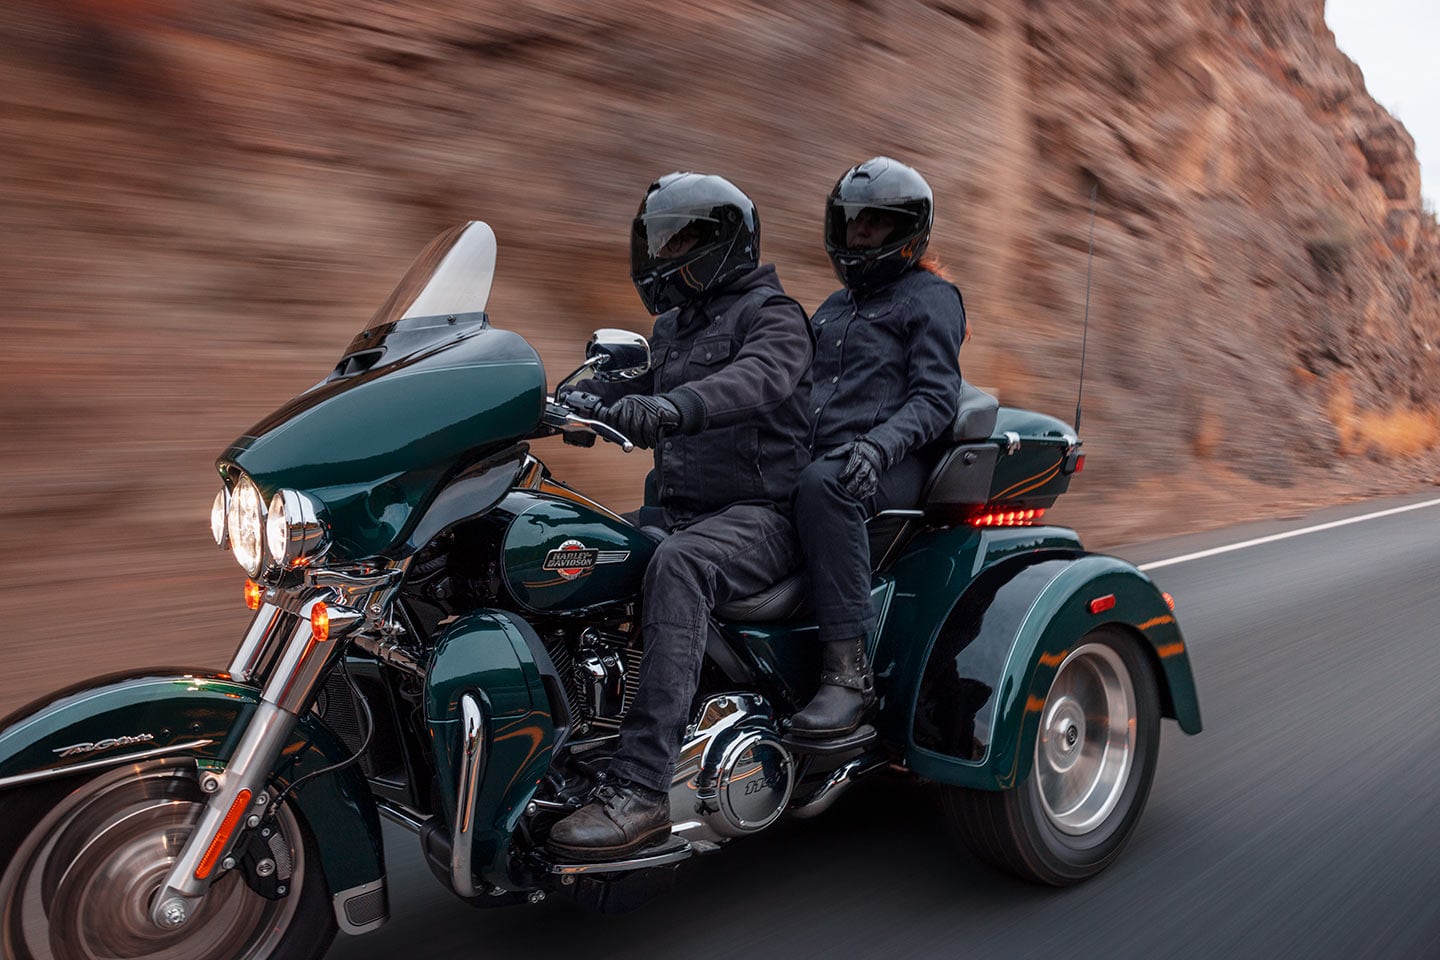 The Tri Glide’s top case includes a plush backrest to boost passenger comfort and safety.